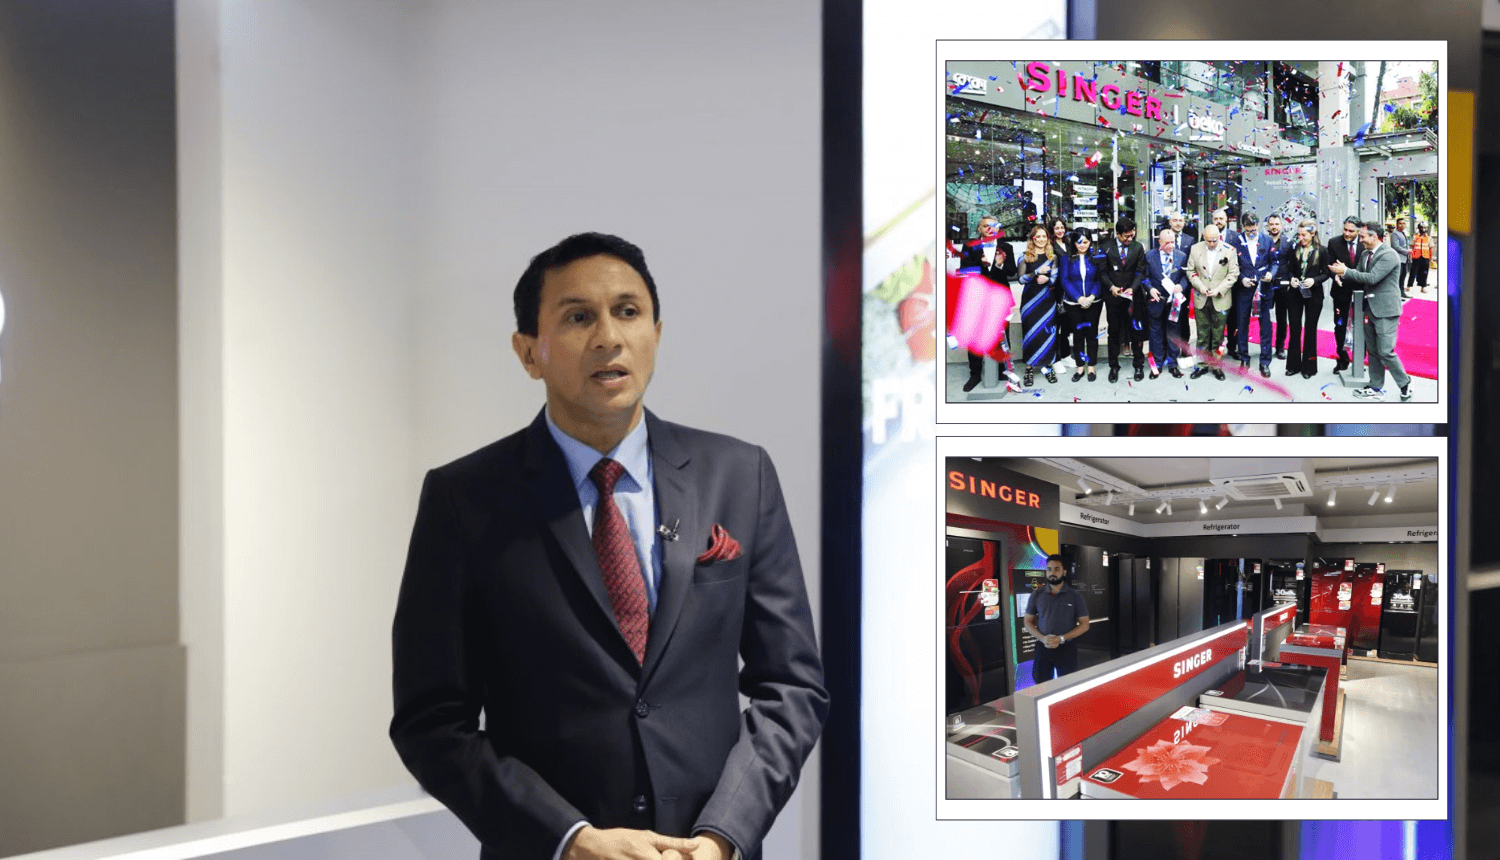 Singer Bangladesh Launches Dhakas First Concept Store